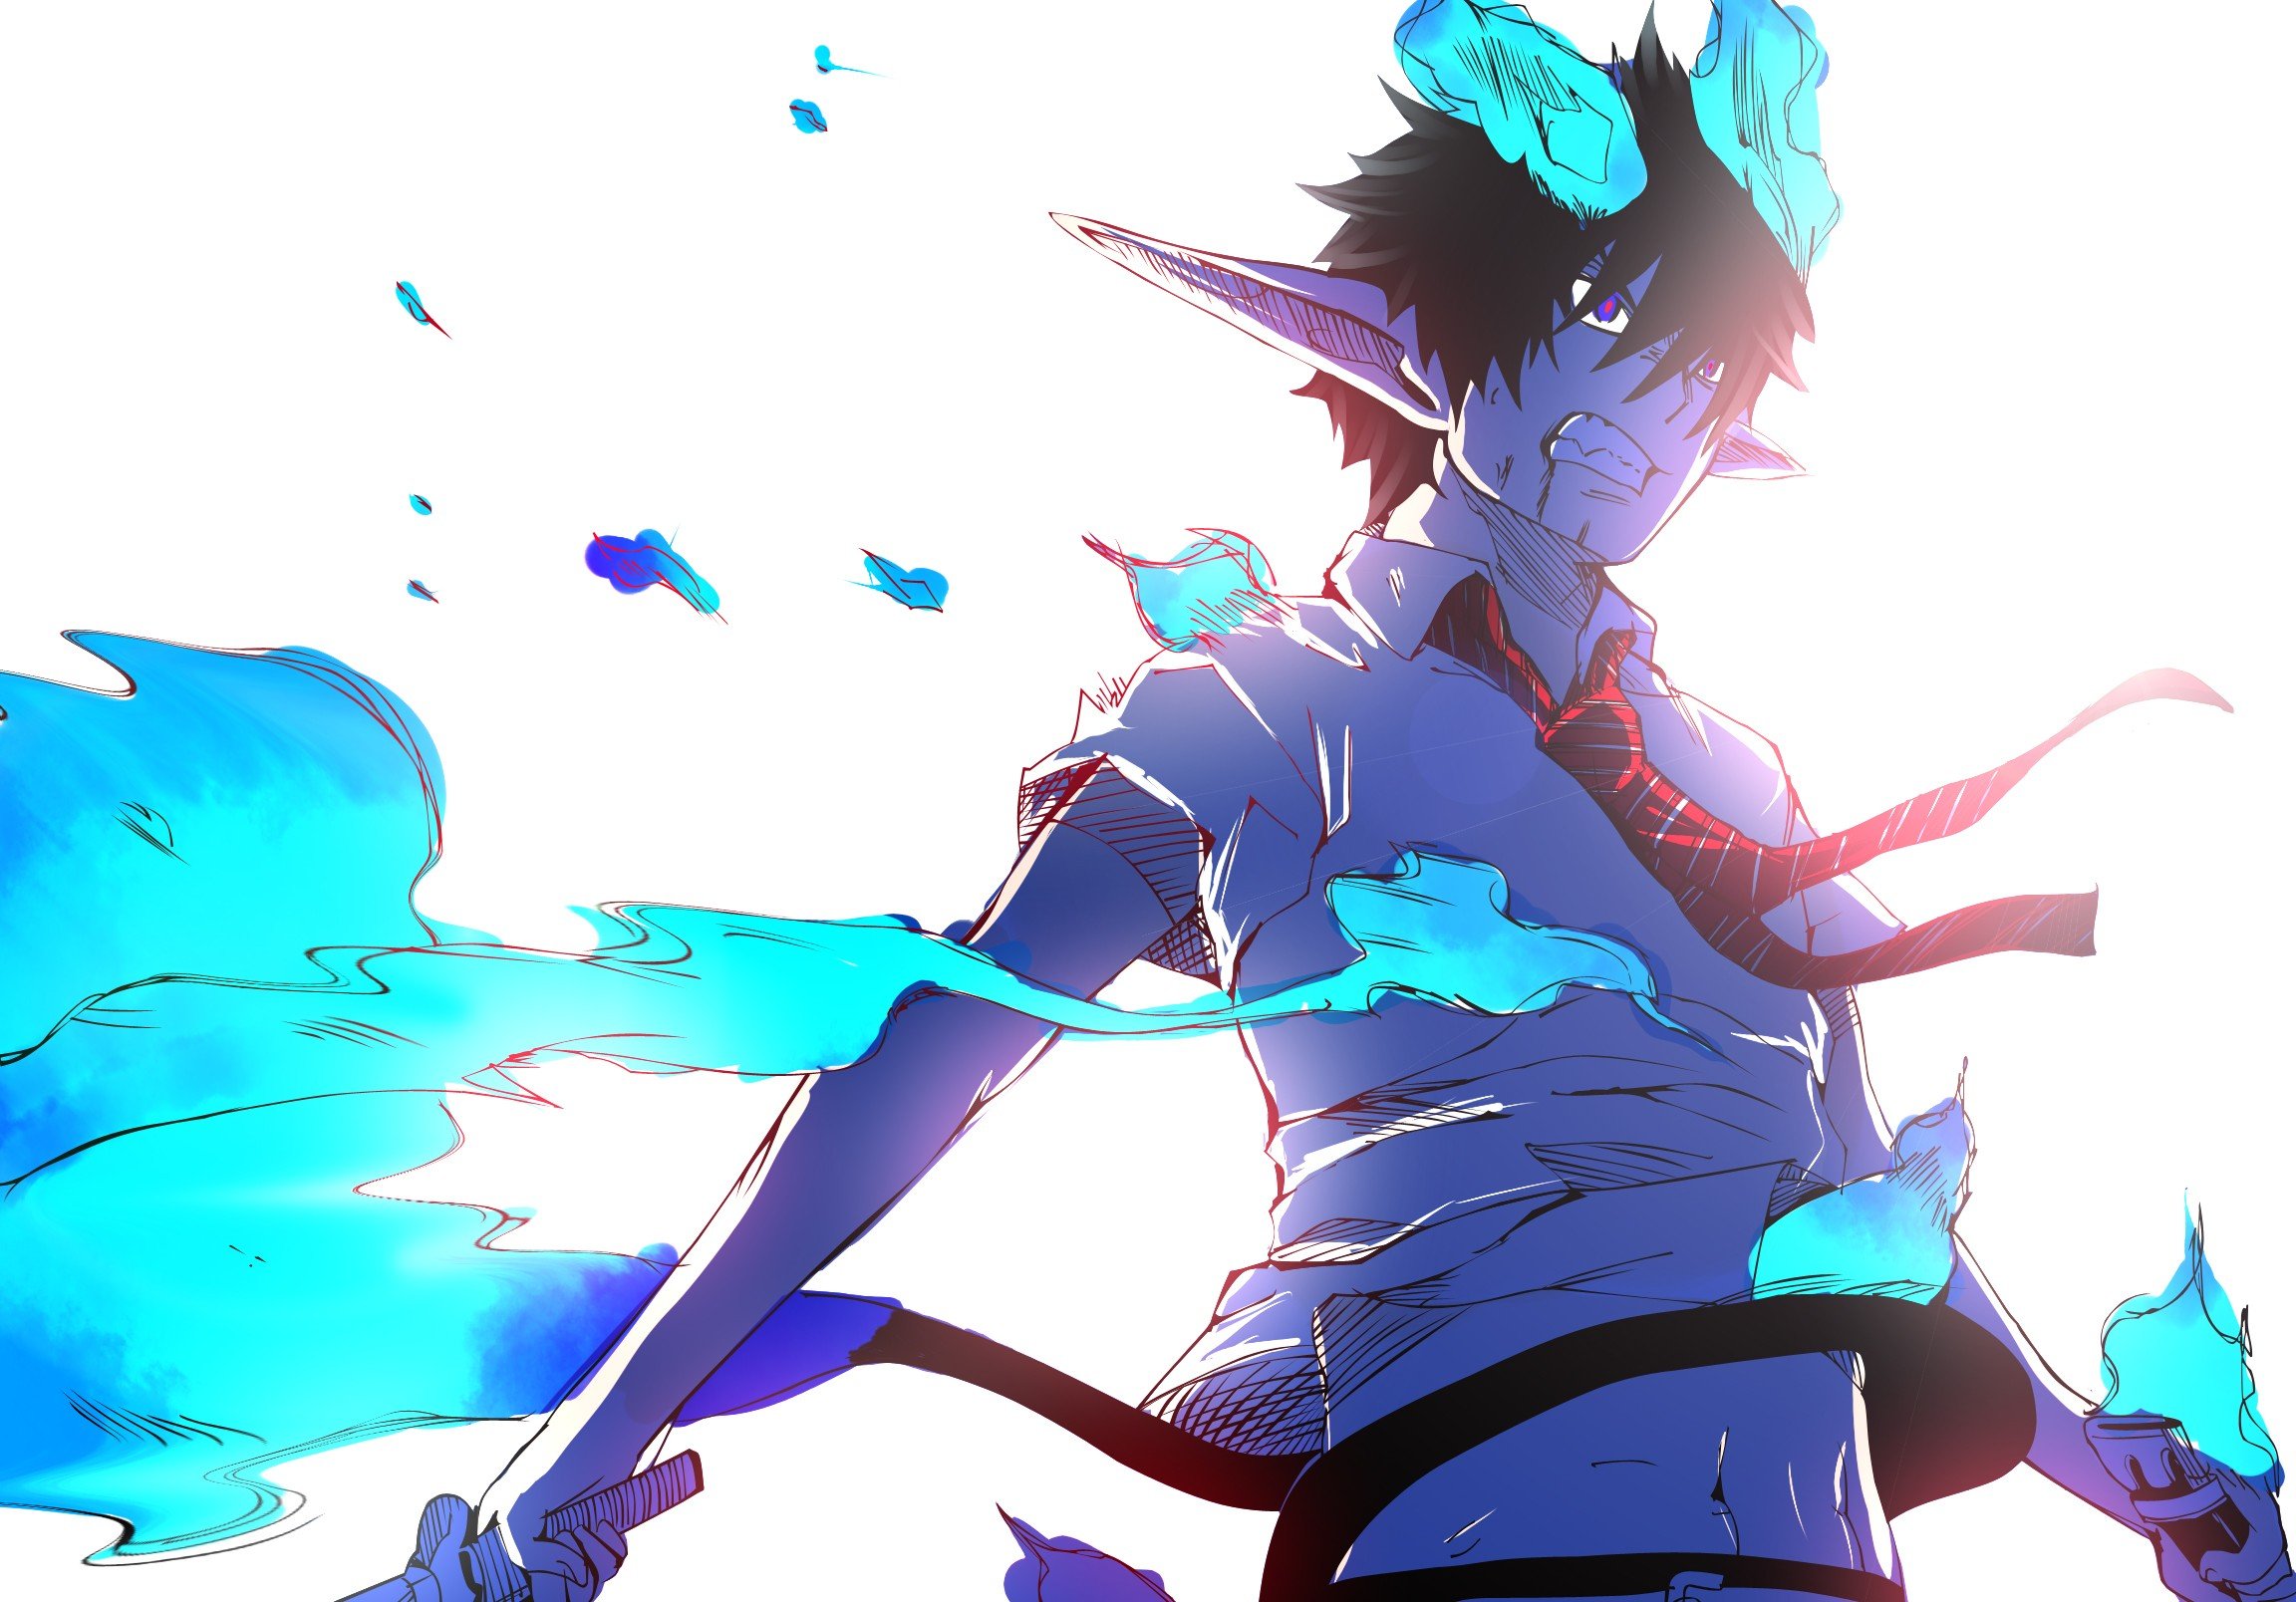 3. Rin Okumura from Blue Exorcist - wide 6